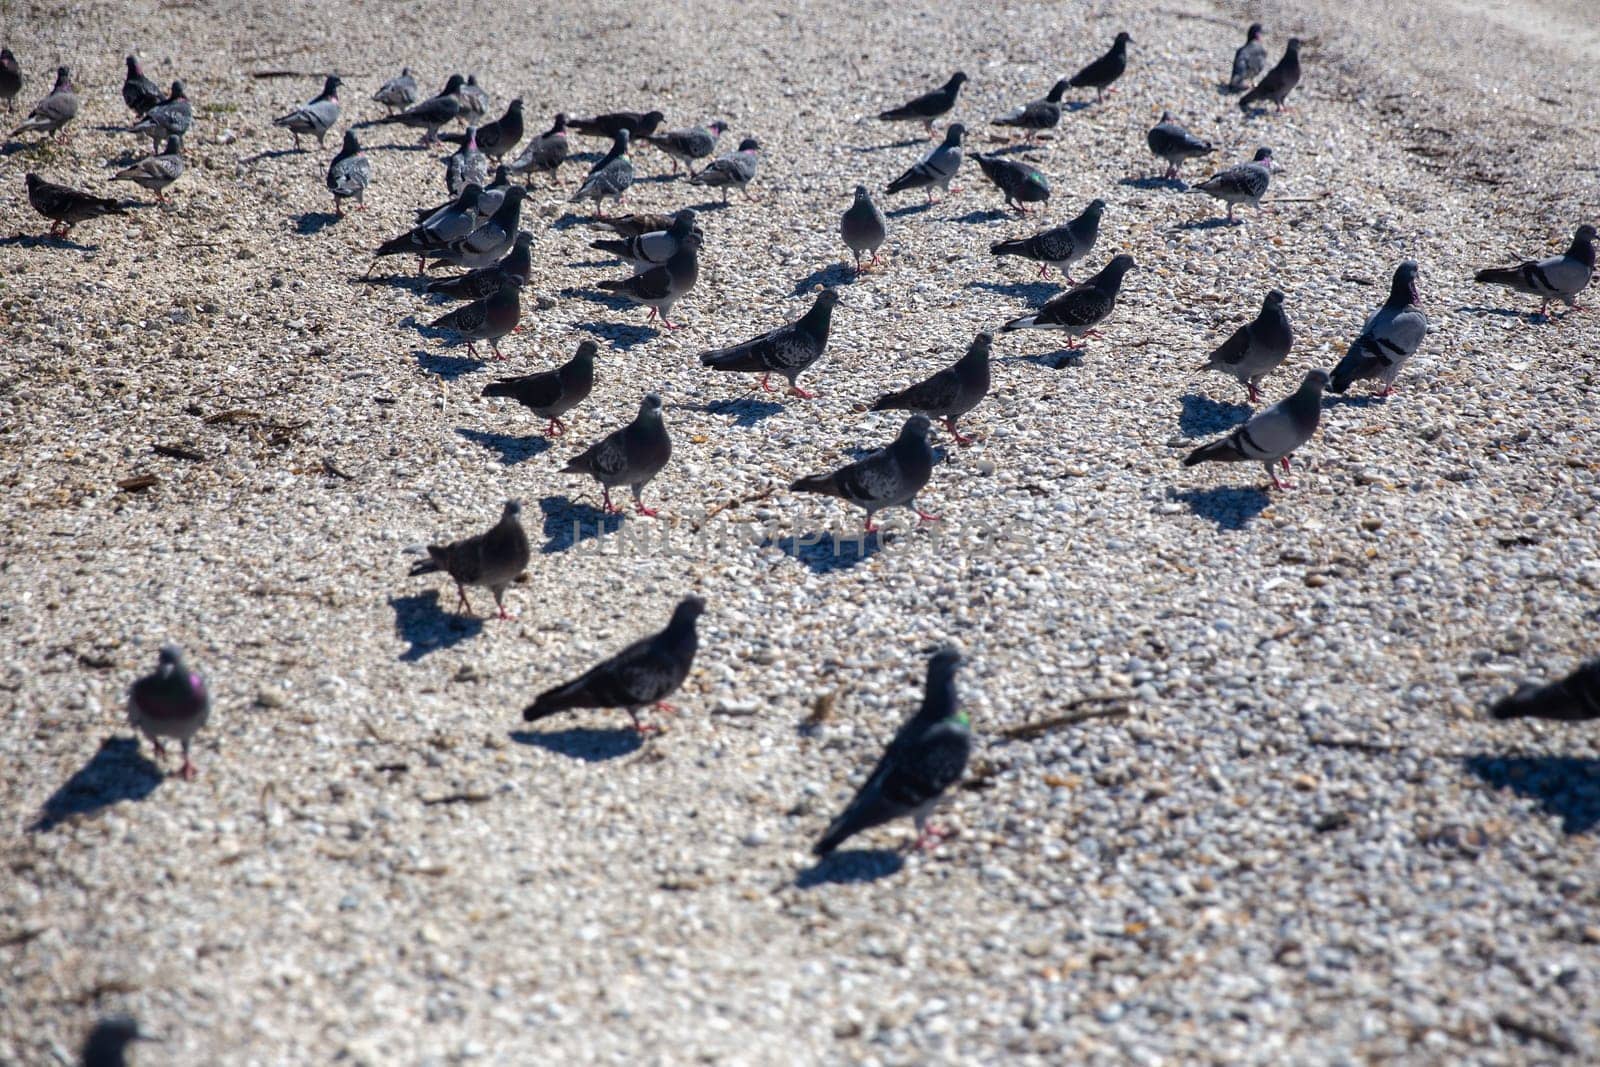 Bunch of Pigeons on the shore of the beach